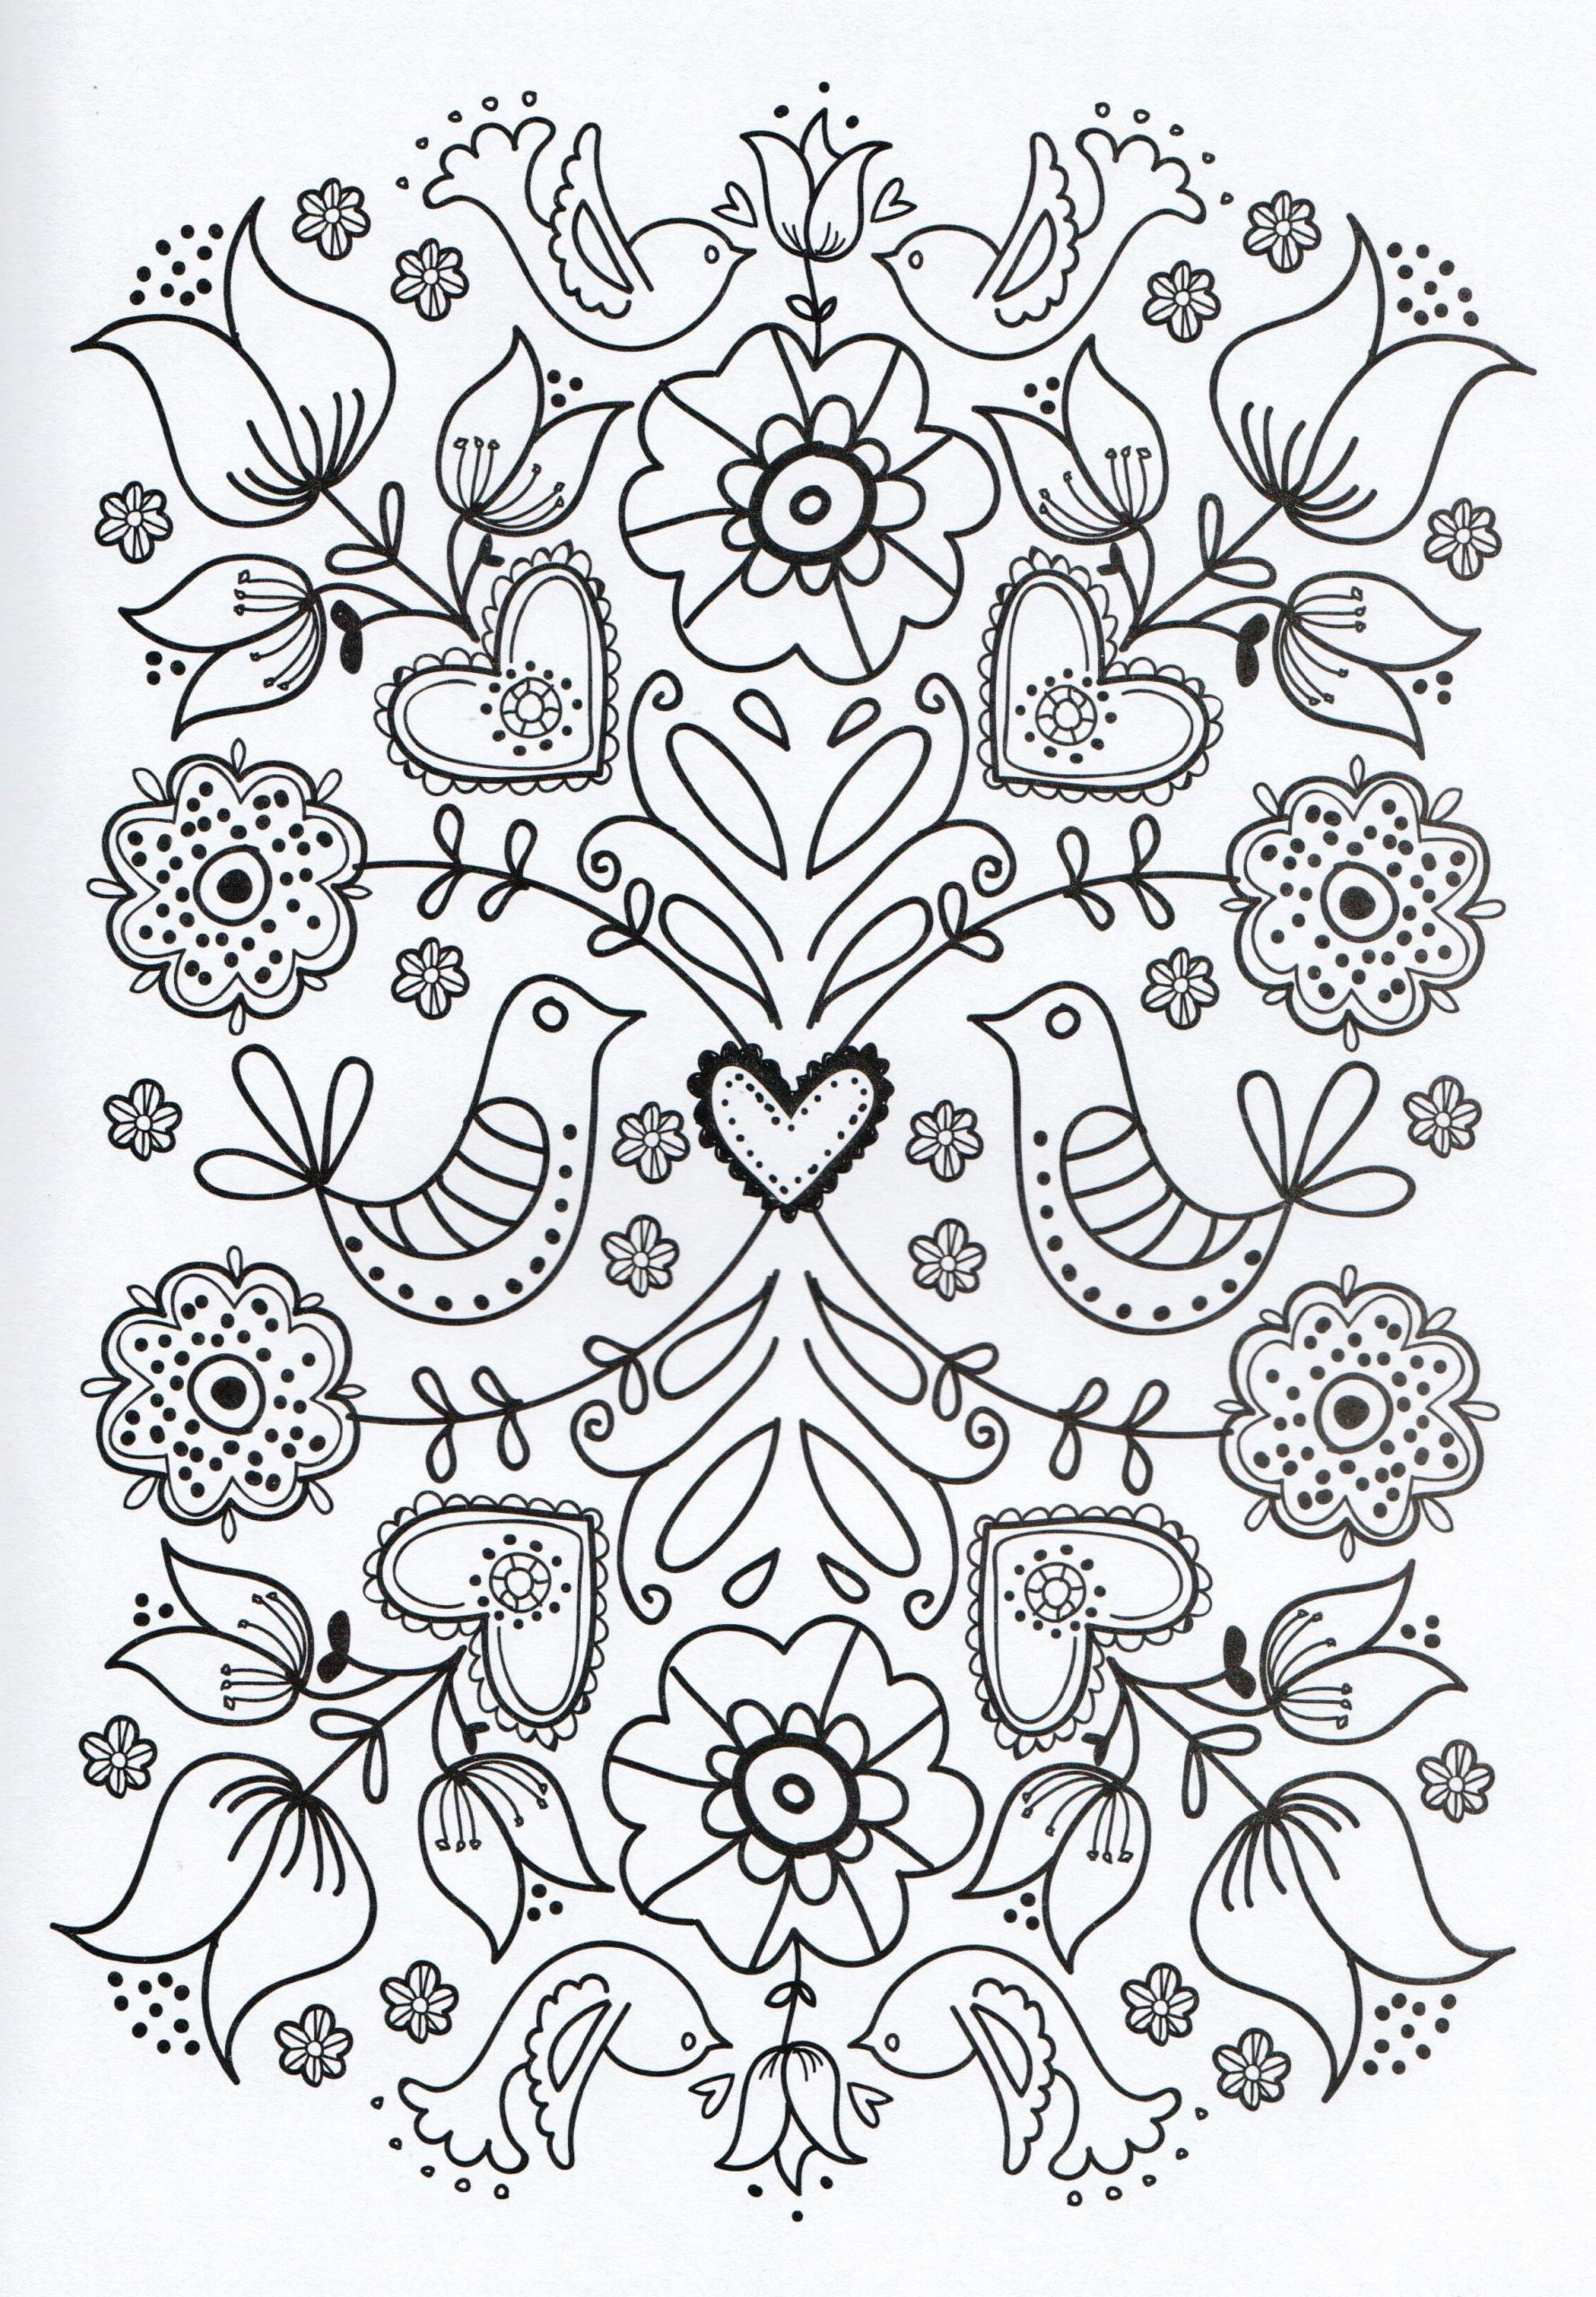 Simple Coloring Pages For Adults
 10 Simple & Useful Mother’s Day Gifts to DIY or Buy